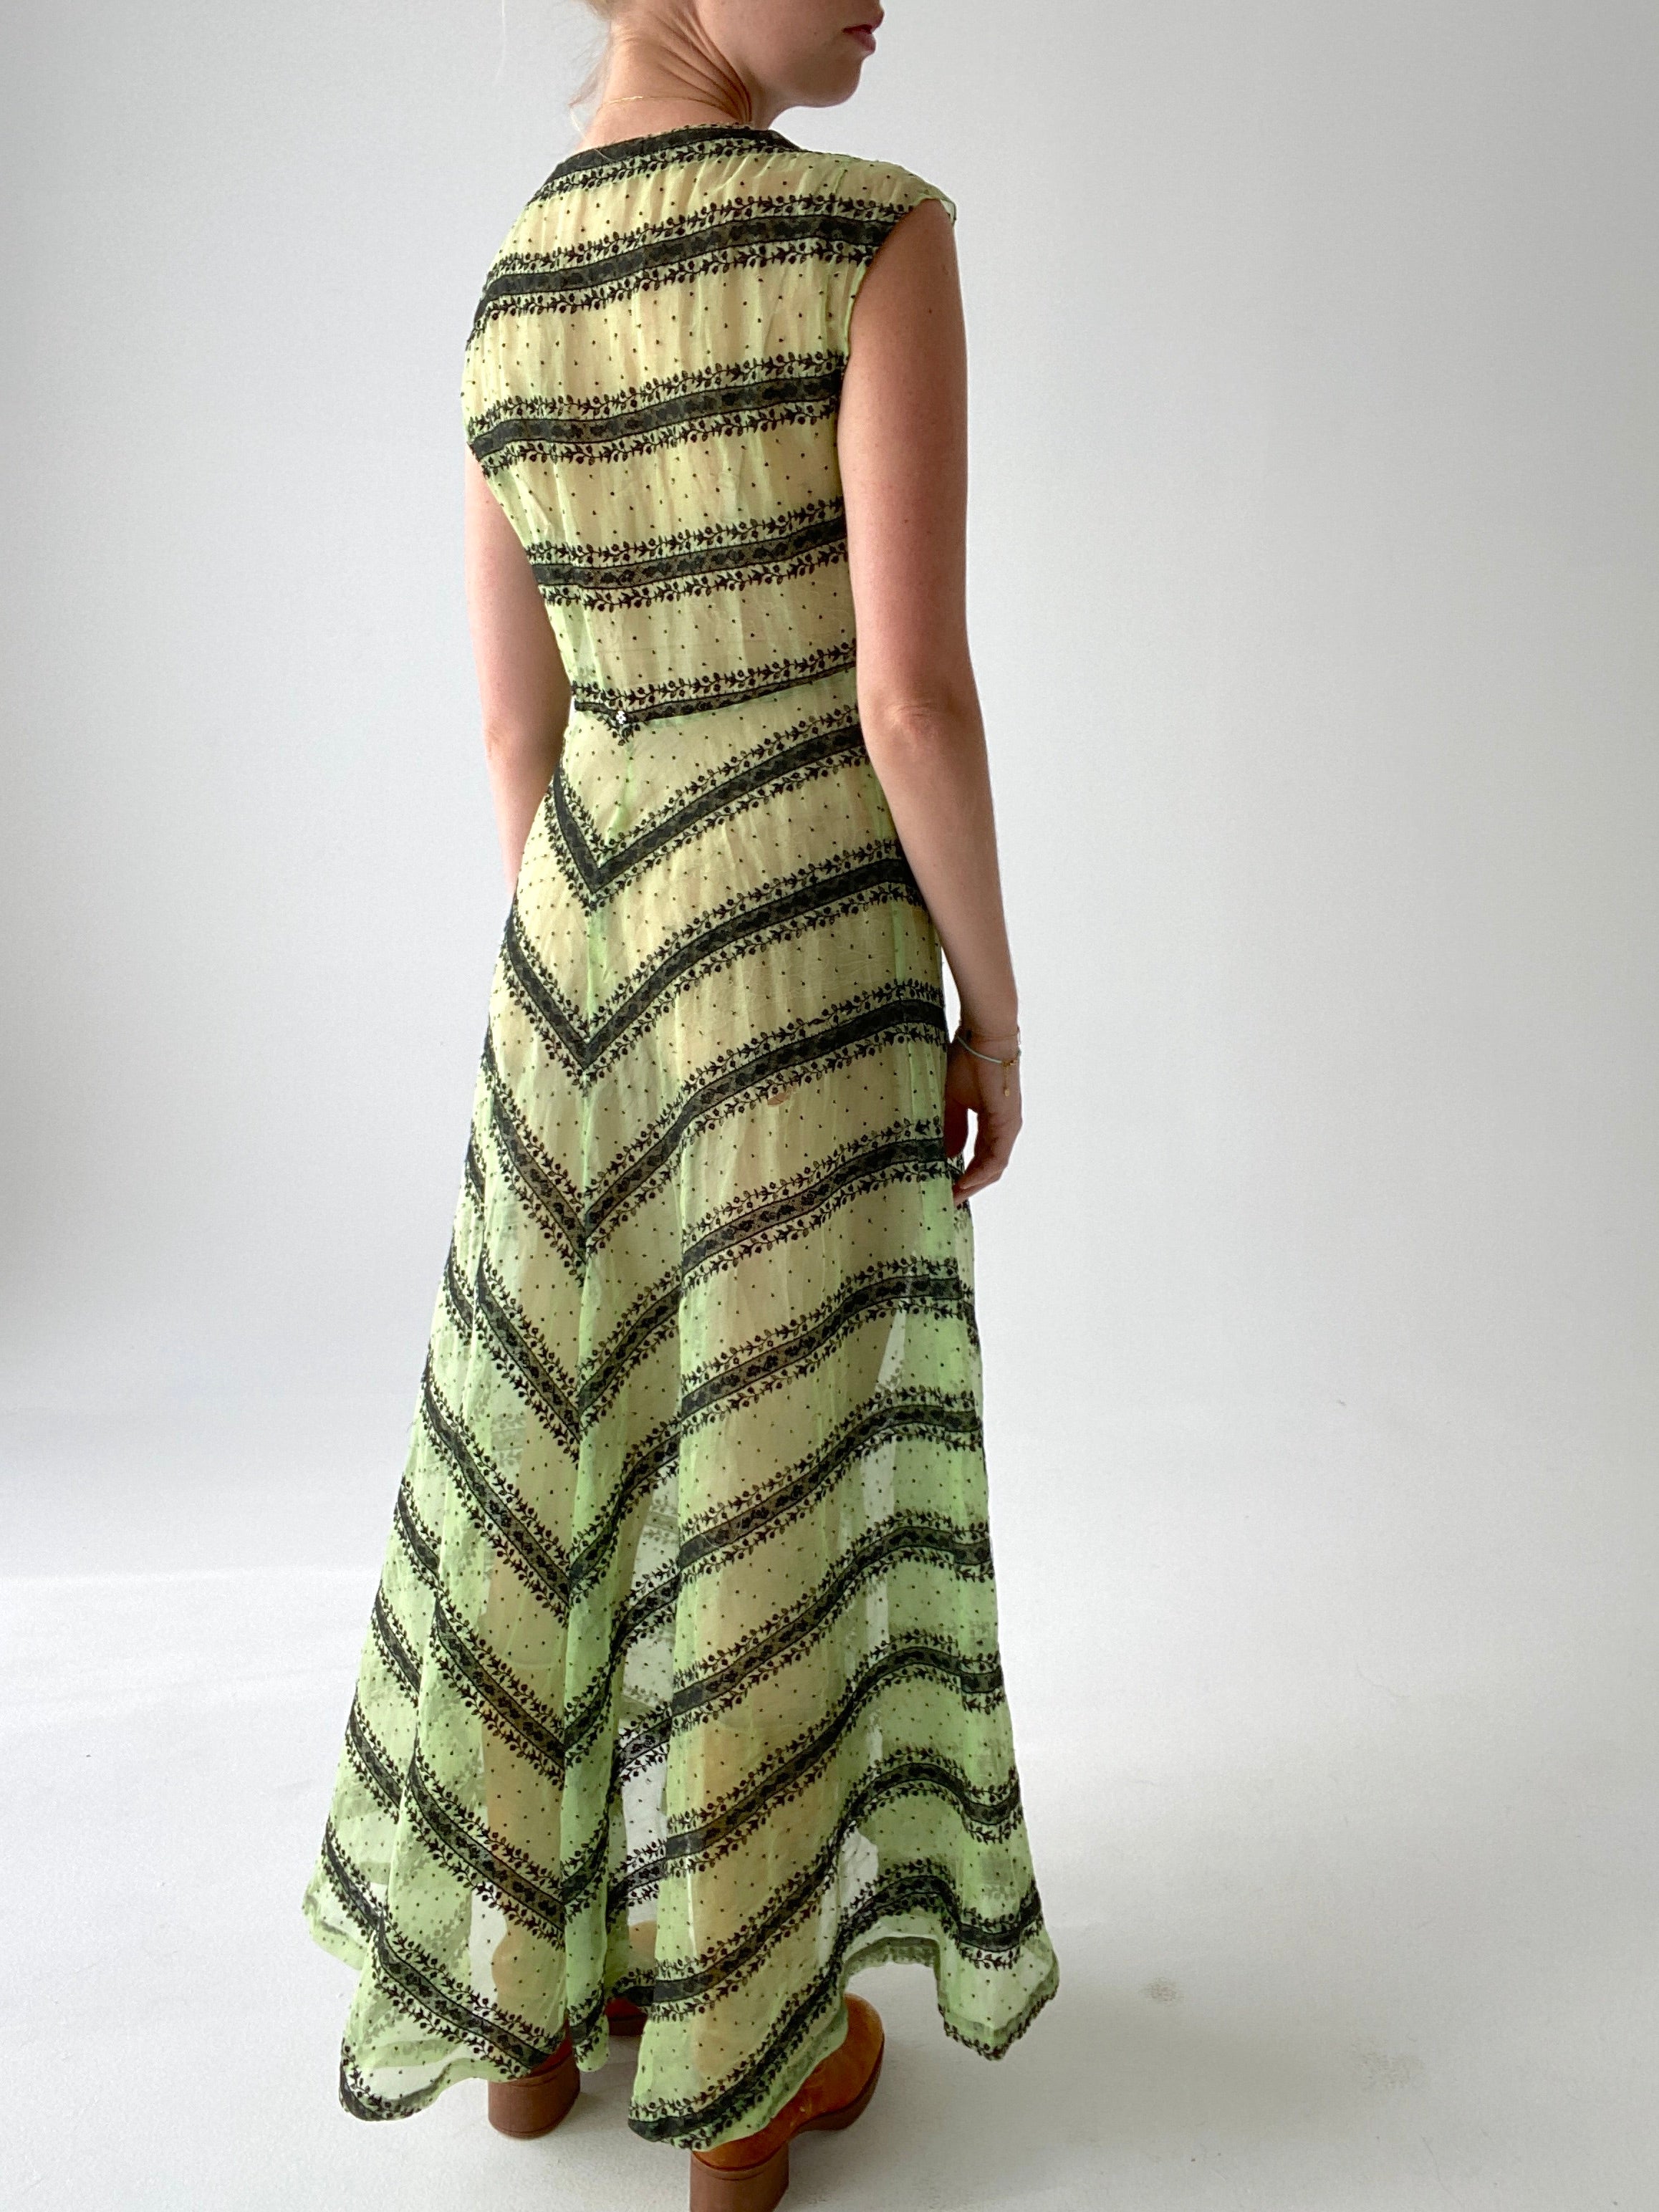 1930's Hand Dyed Green Dress with Black Lace Stripes